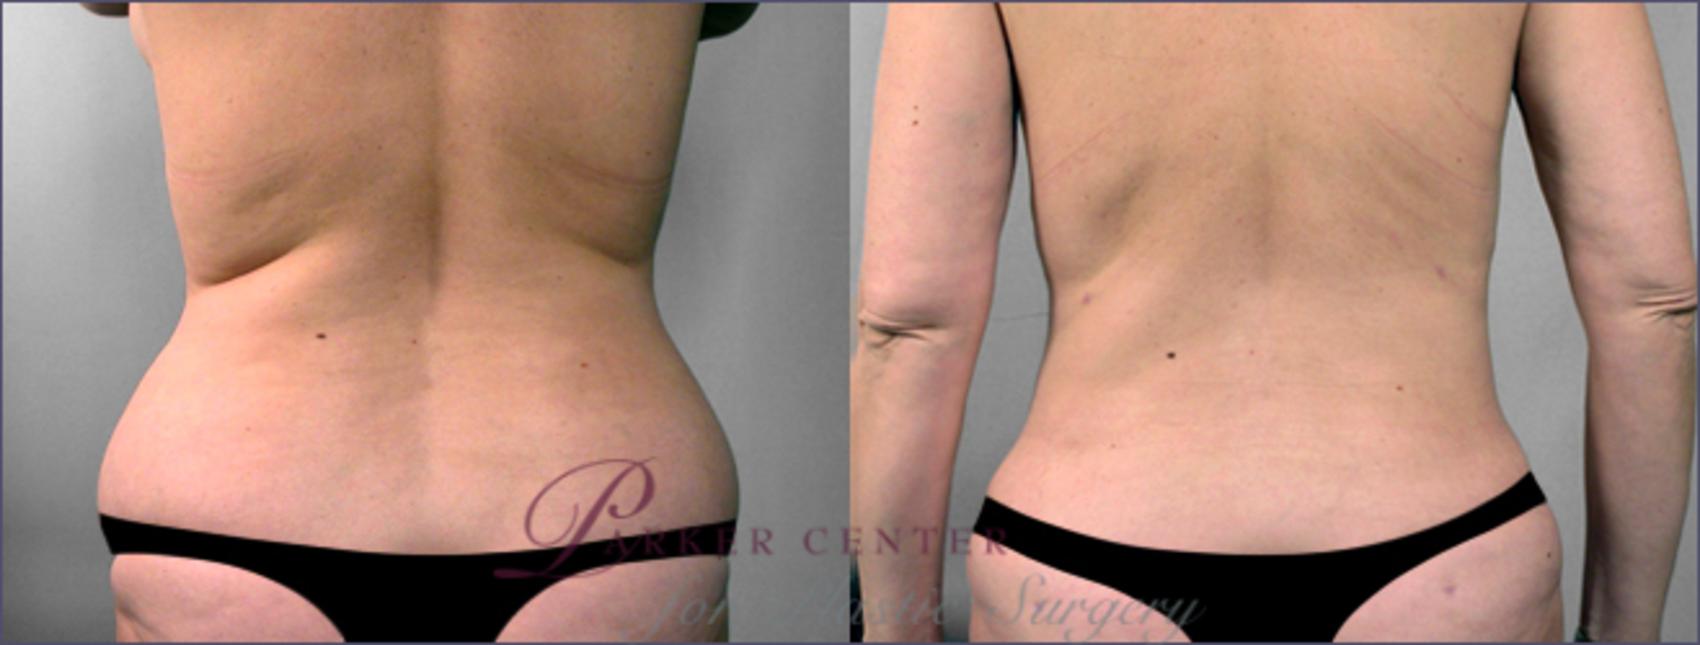 Liposuction Before and After Pictures Case 769, Paramus, NJ